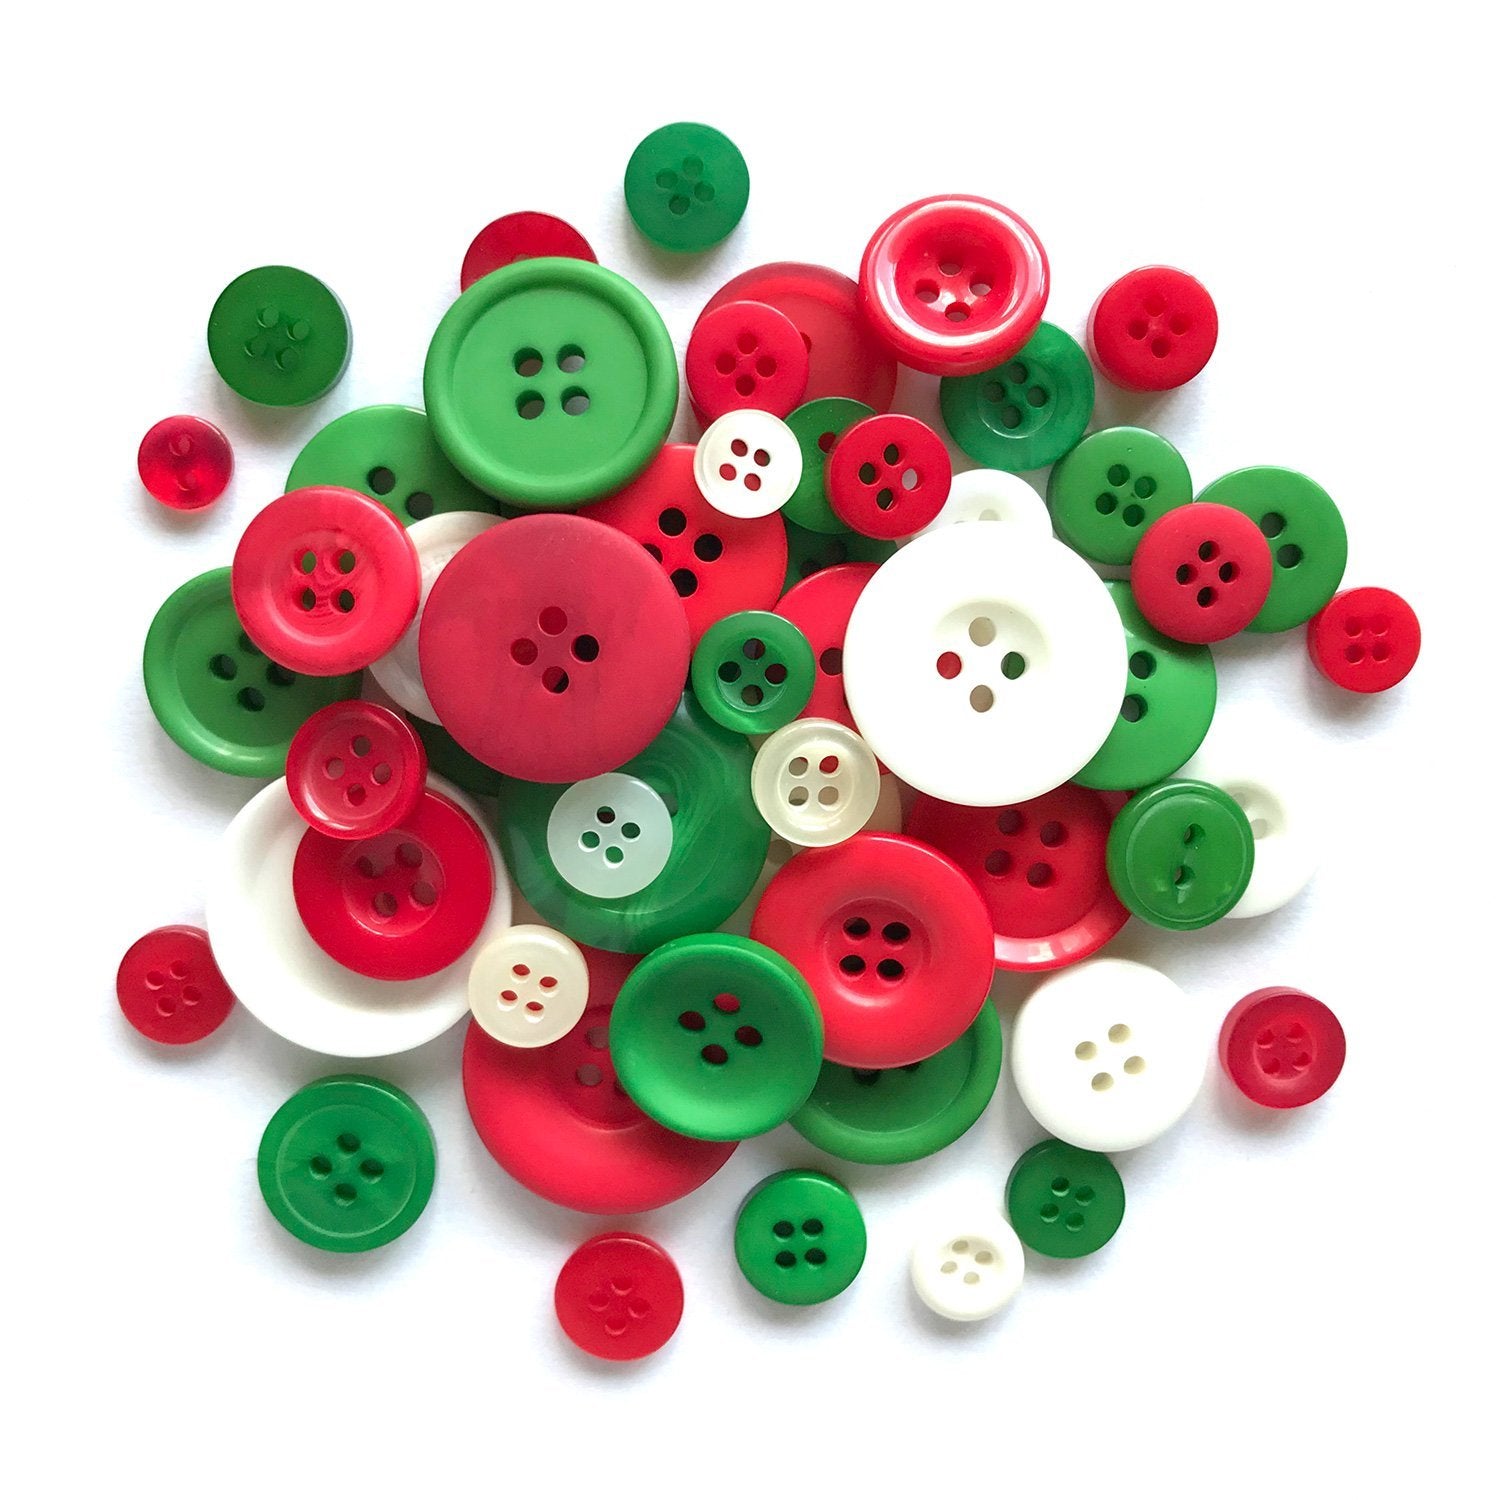  Buttons Galore Red Hearts Button Bag